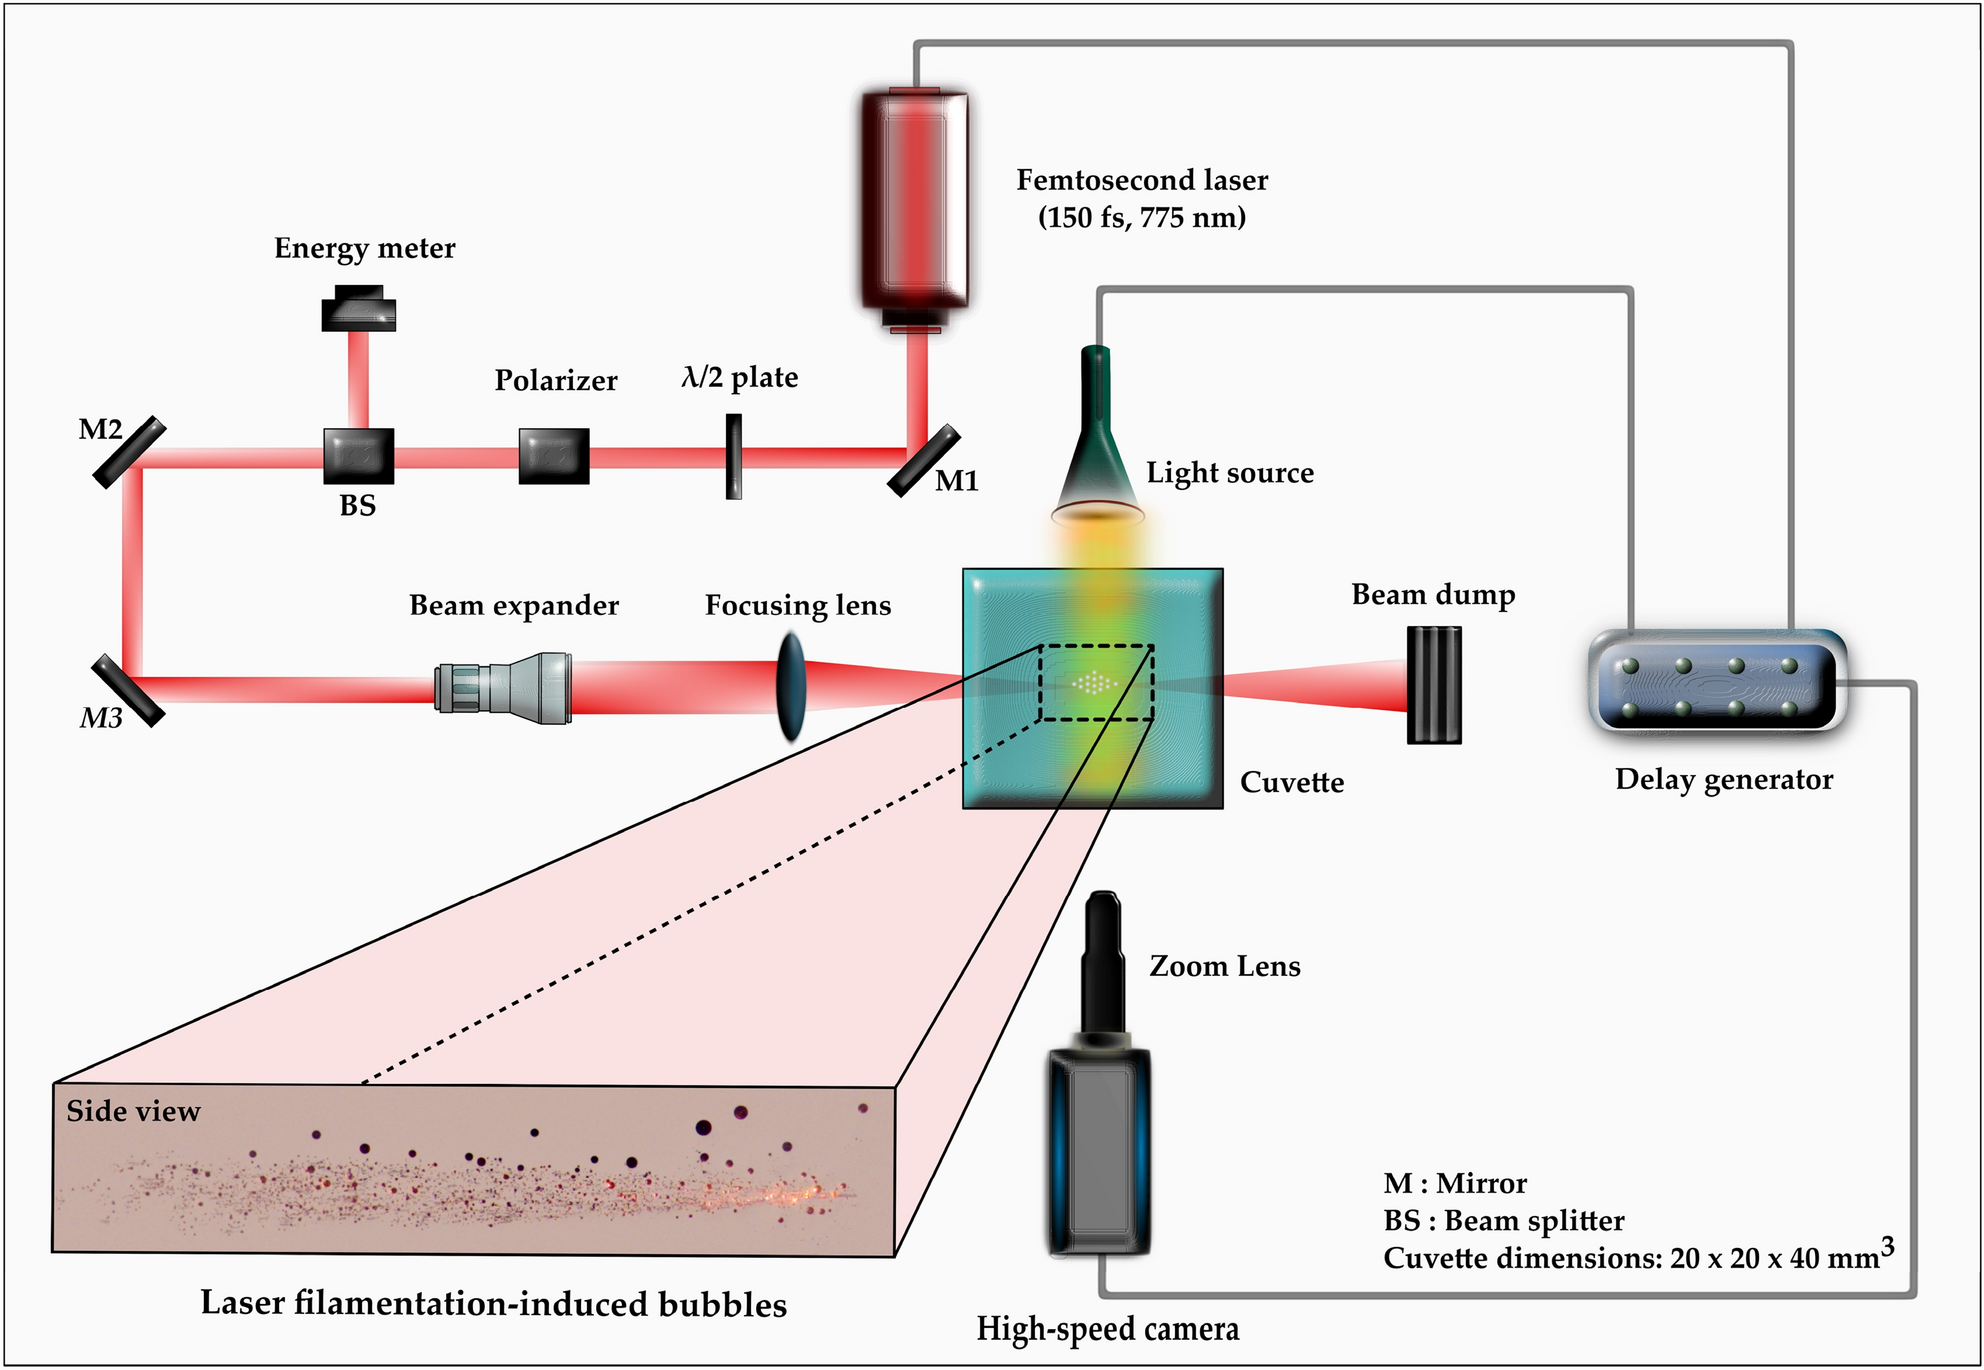 Controlling bubble generation by femtosecond laser-induced filamentation